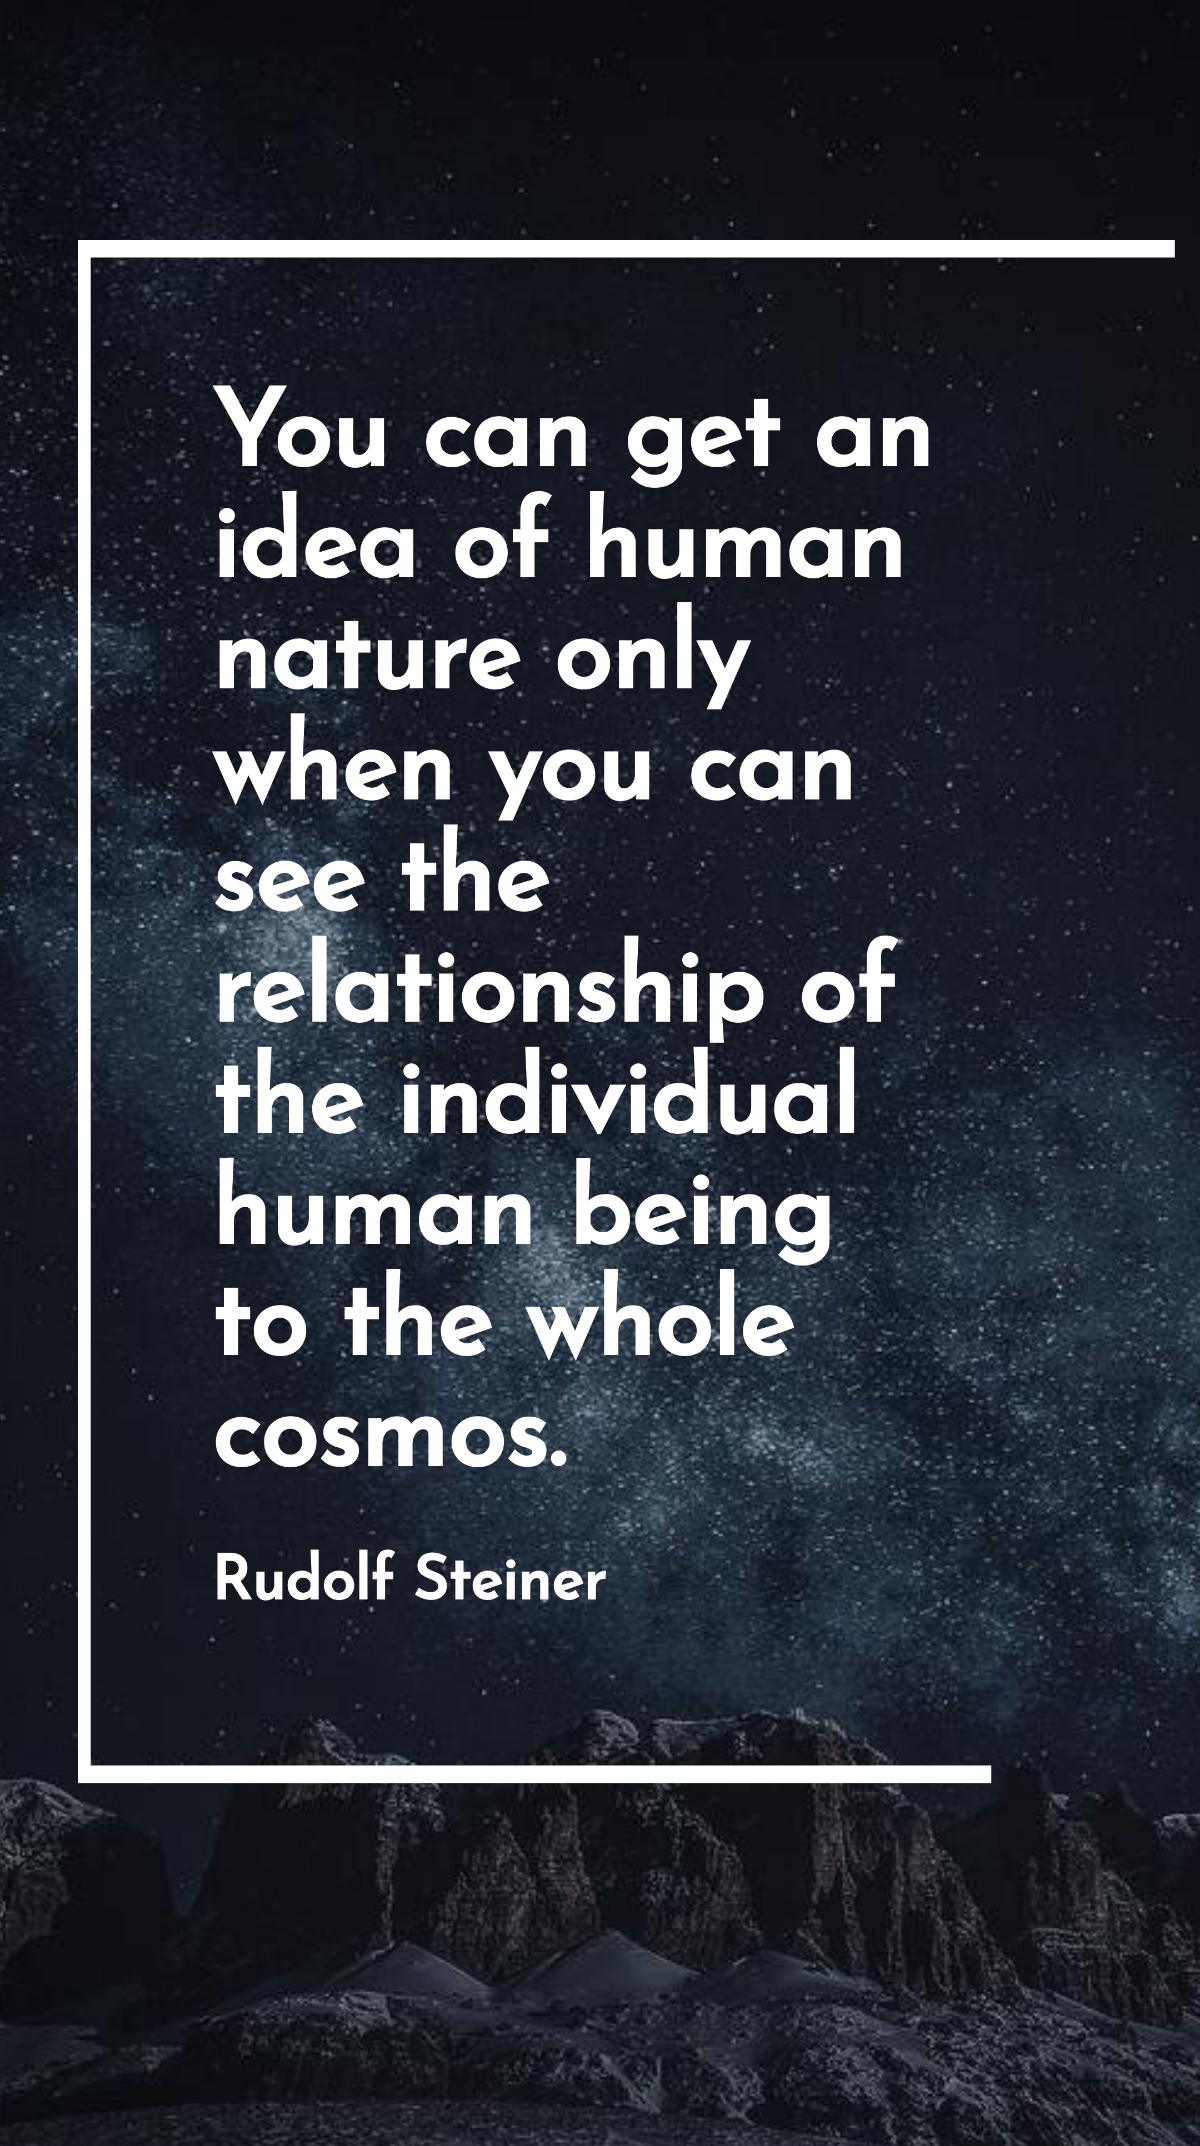 Rudolf Steiner - You can get an idea of human nature only when you can see the relationship of the individual human being to the whole cosmos. Template